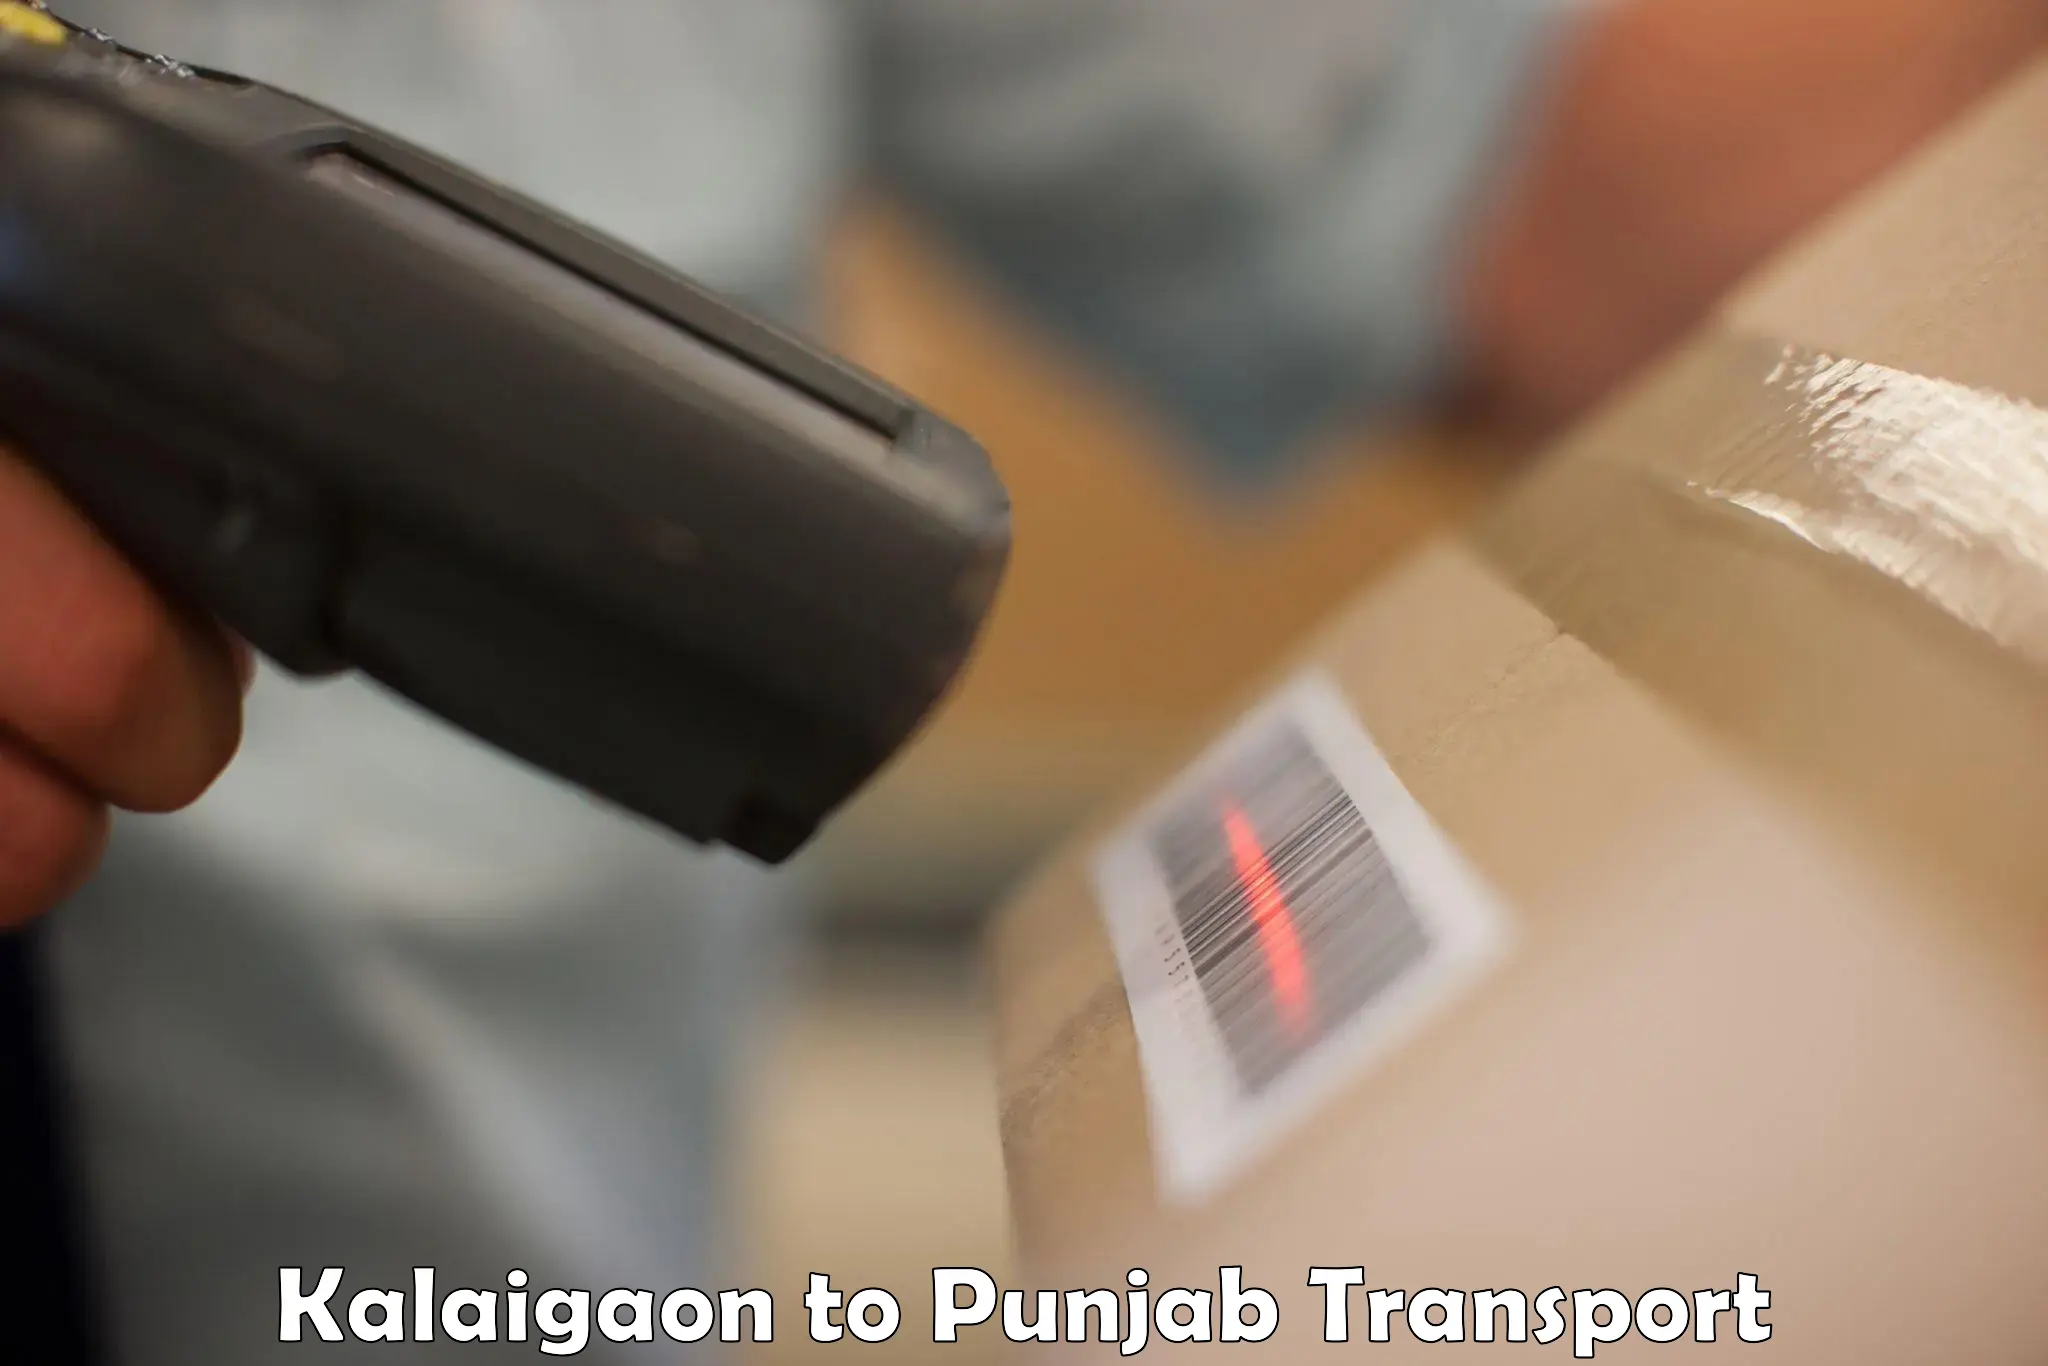 Road transport online services Kalaigaon to Malout